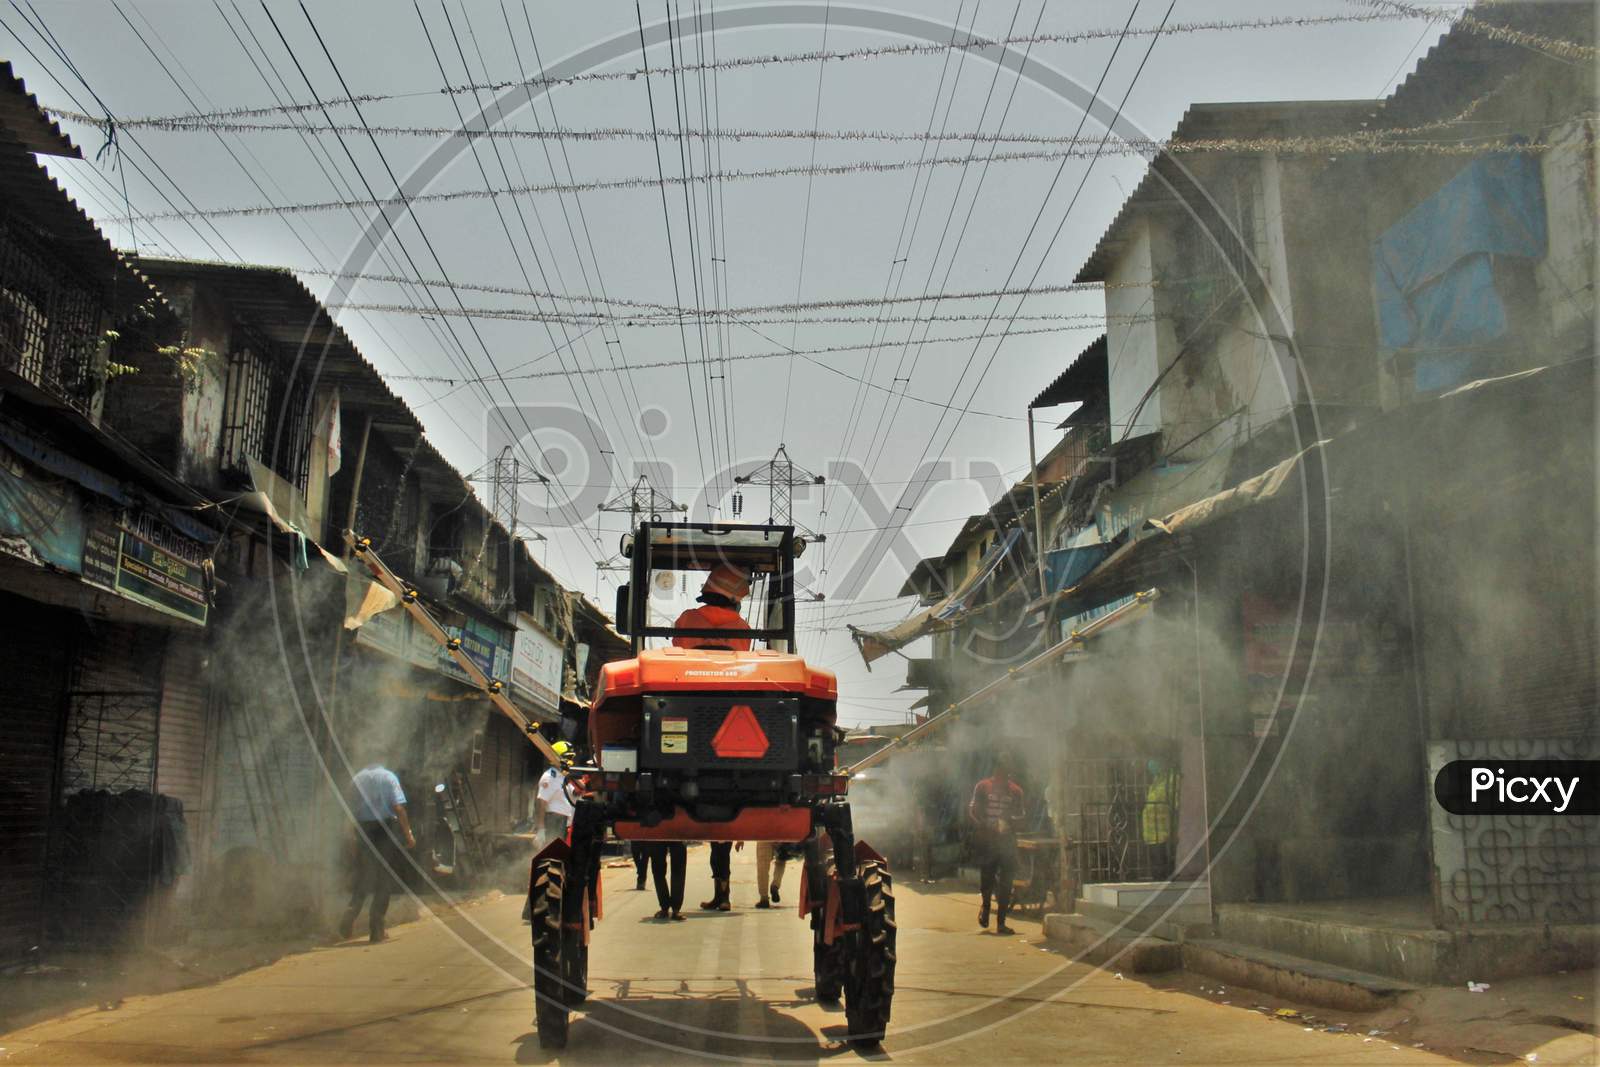 Fire personnel use an aerial mist blowing machine to spray disinfectant to decontaminate a street during a 21-day nationwide lockdown to limit the spreading of coronavirus disease (COVID-19) in Mumbai, India on April 12, 2020.